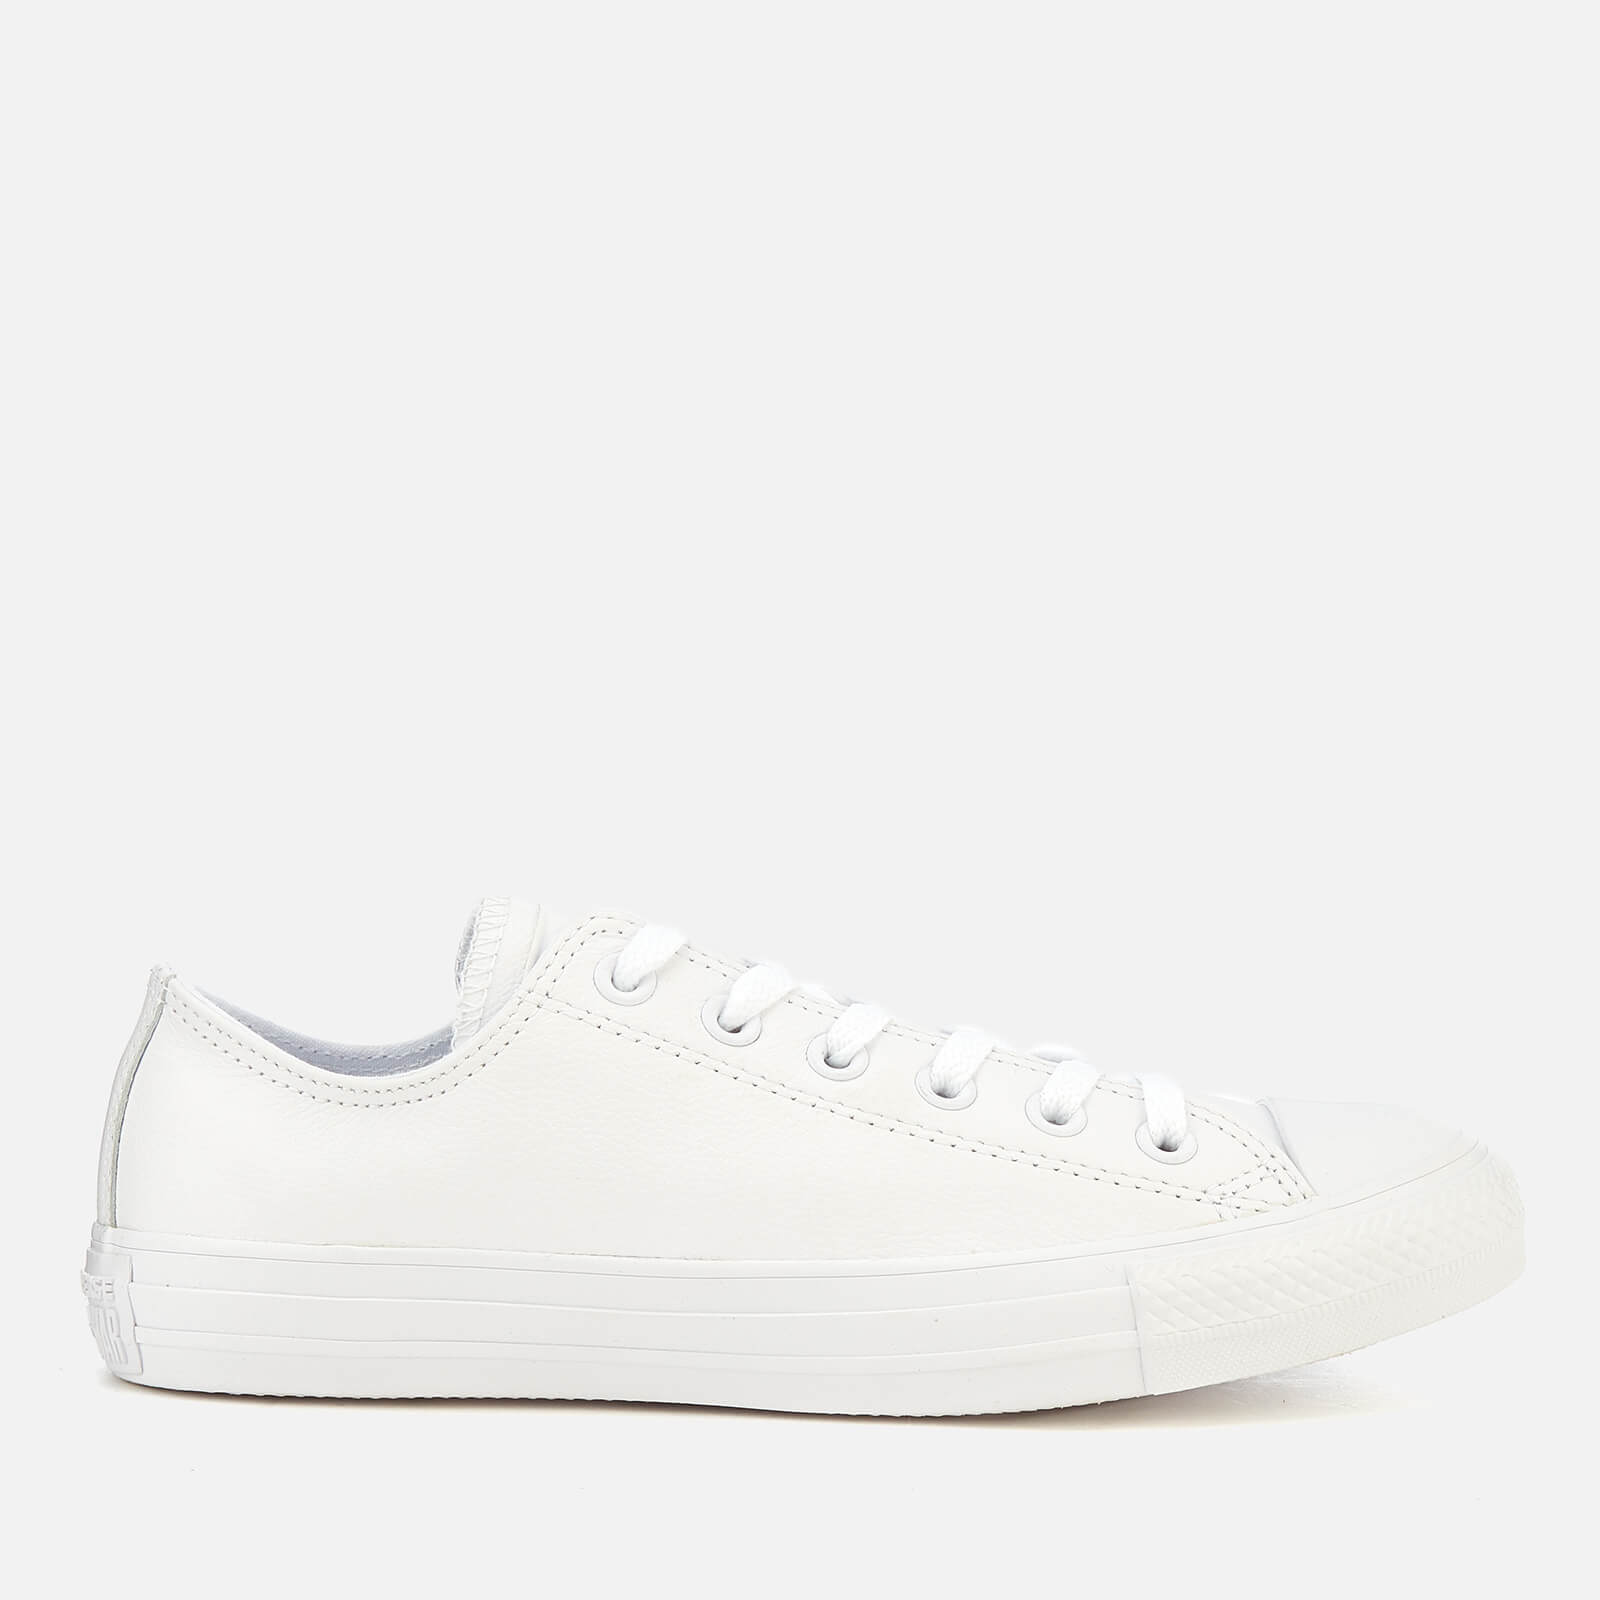 Converse Chuck Taylor All Star Ox Trainers - White - UK 7